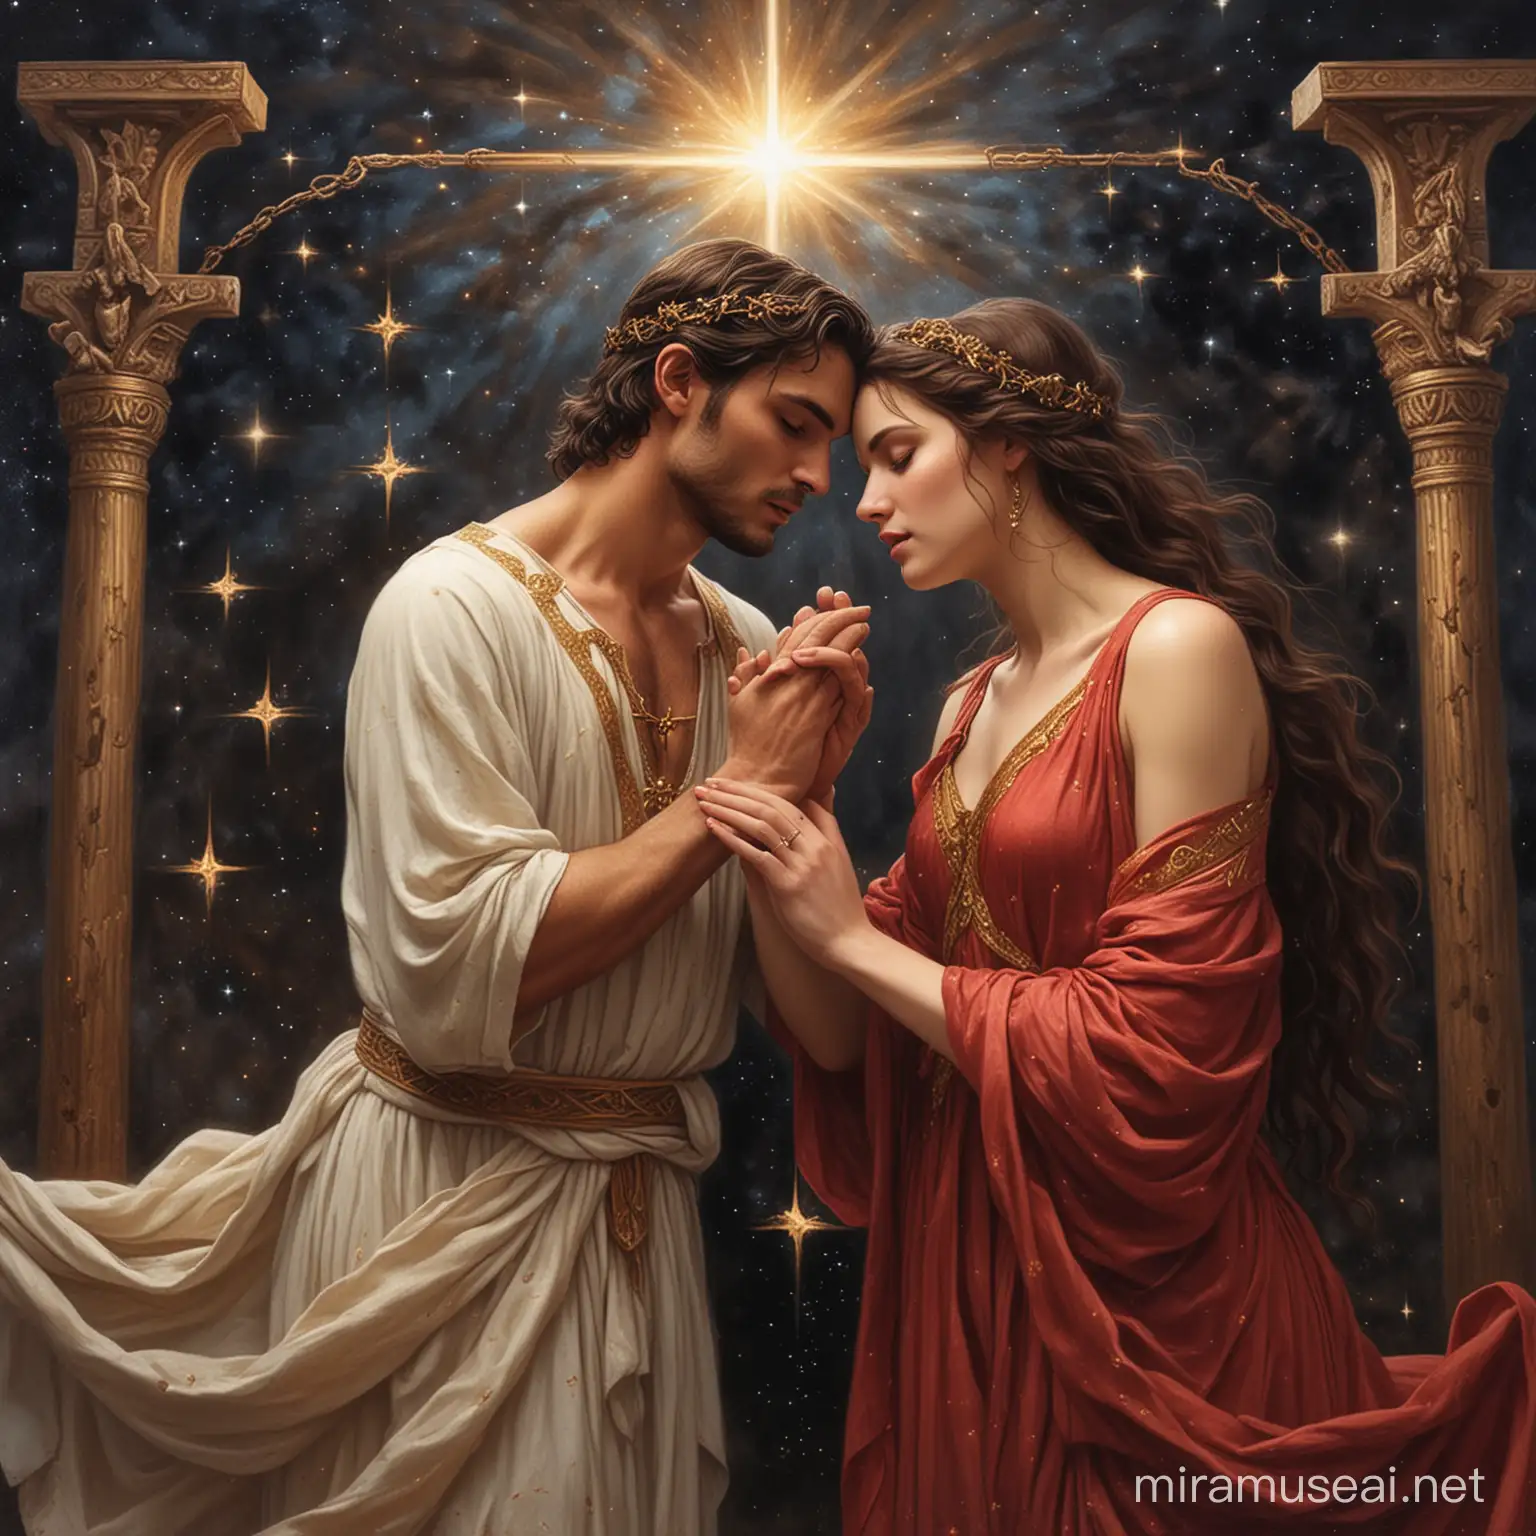 sacrifice of love, ancient prophesy, star crossed lovers